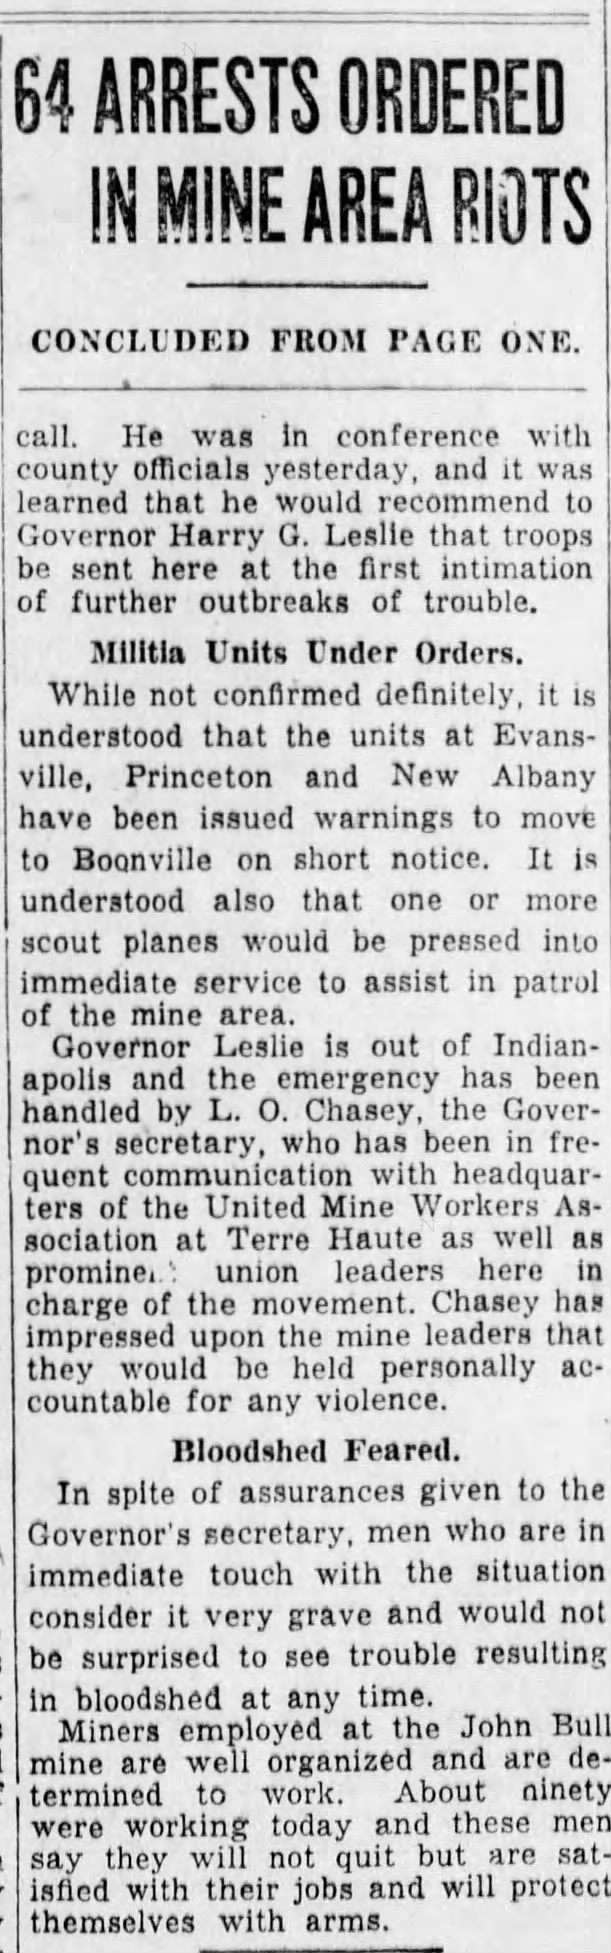 The Indianapolis Star (Indianapolis, Indiana) 11 Dec 1929 Wed page 9